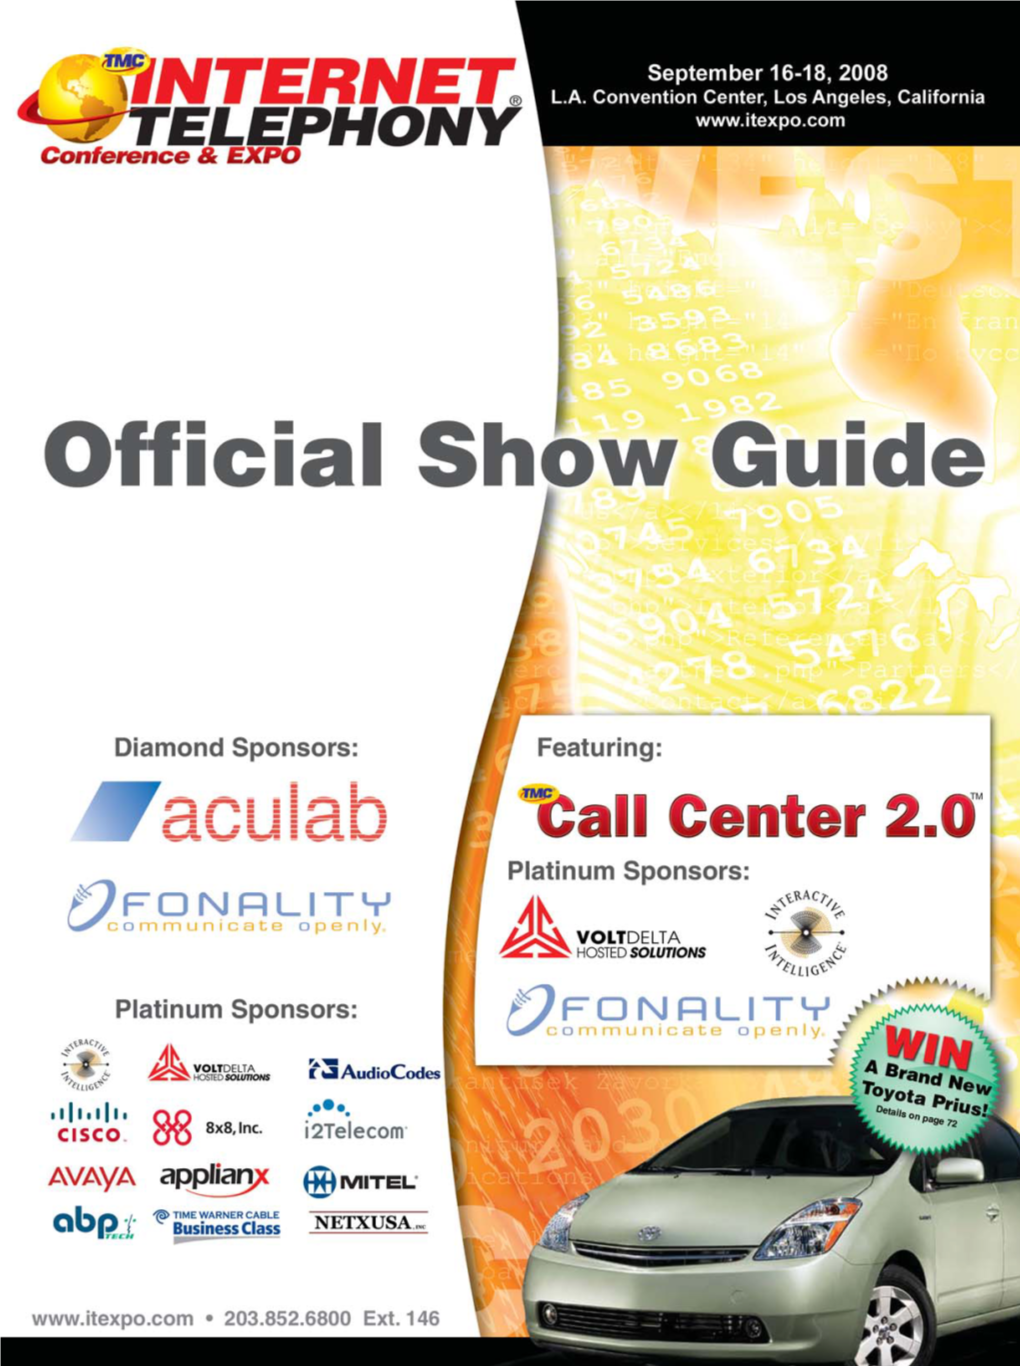 IT Expo Show Guide.Pdf